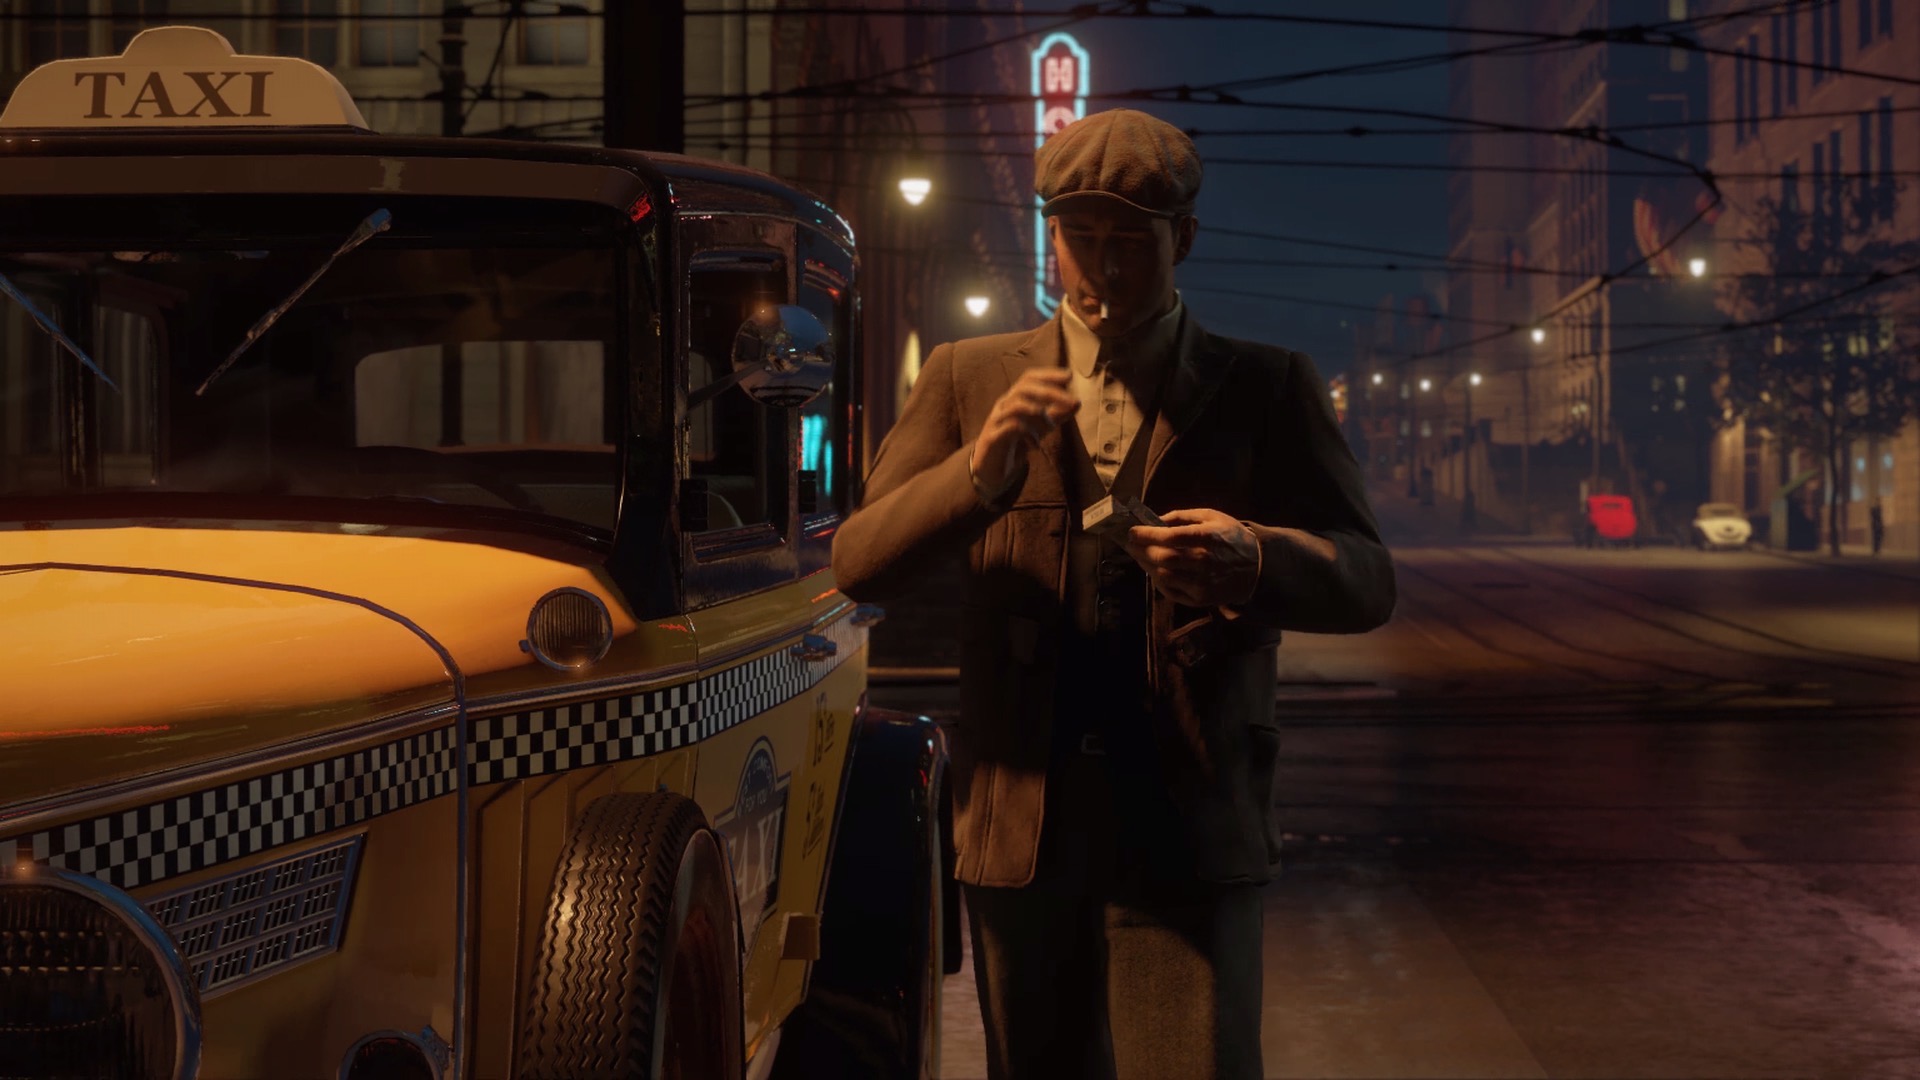 Main character Tommy wearing a cap and suit lighting a cigarette while walking up to the side of a taxi cab.